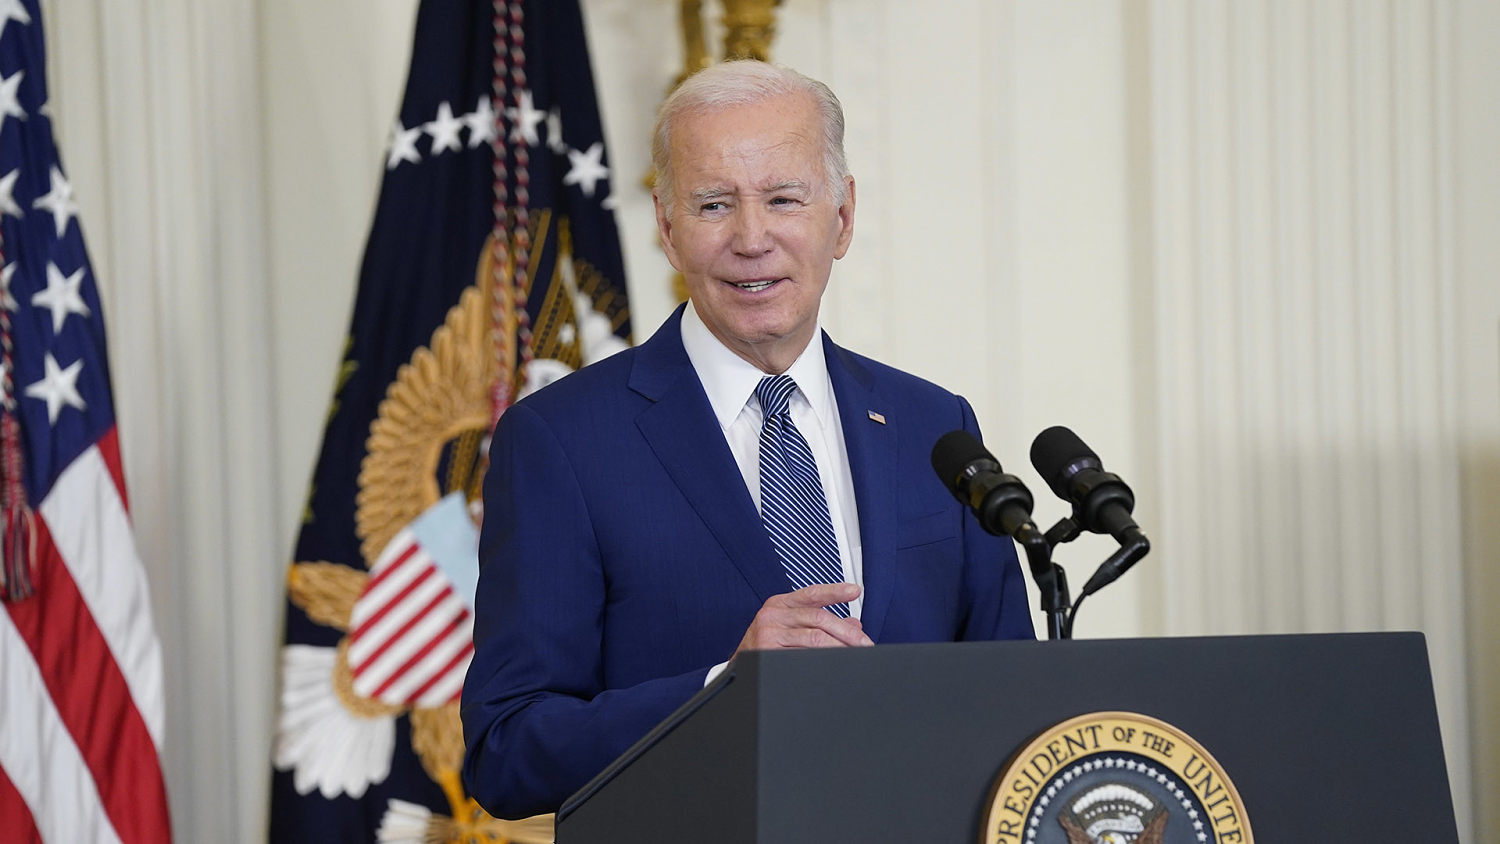 Biden delivers remarks on the care economy